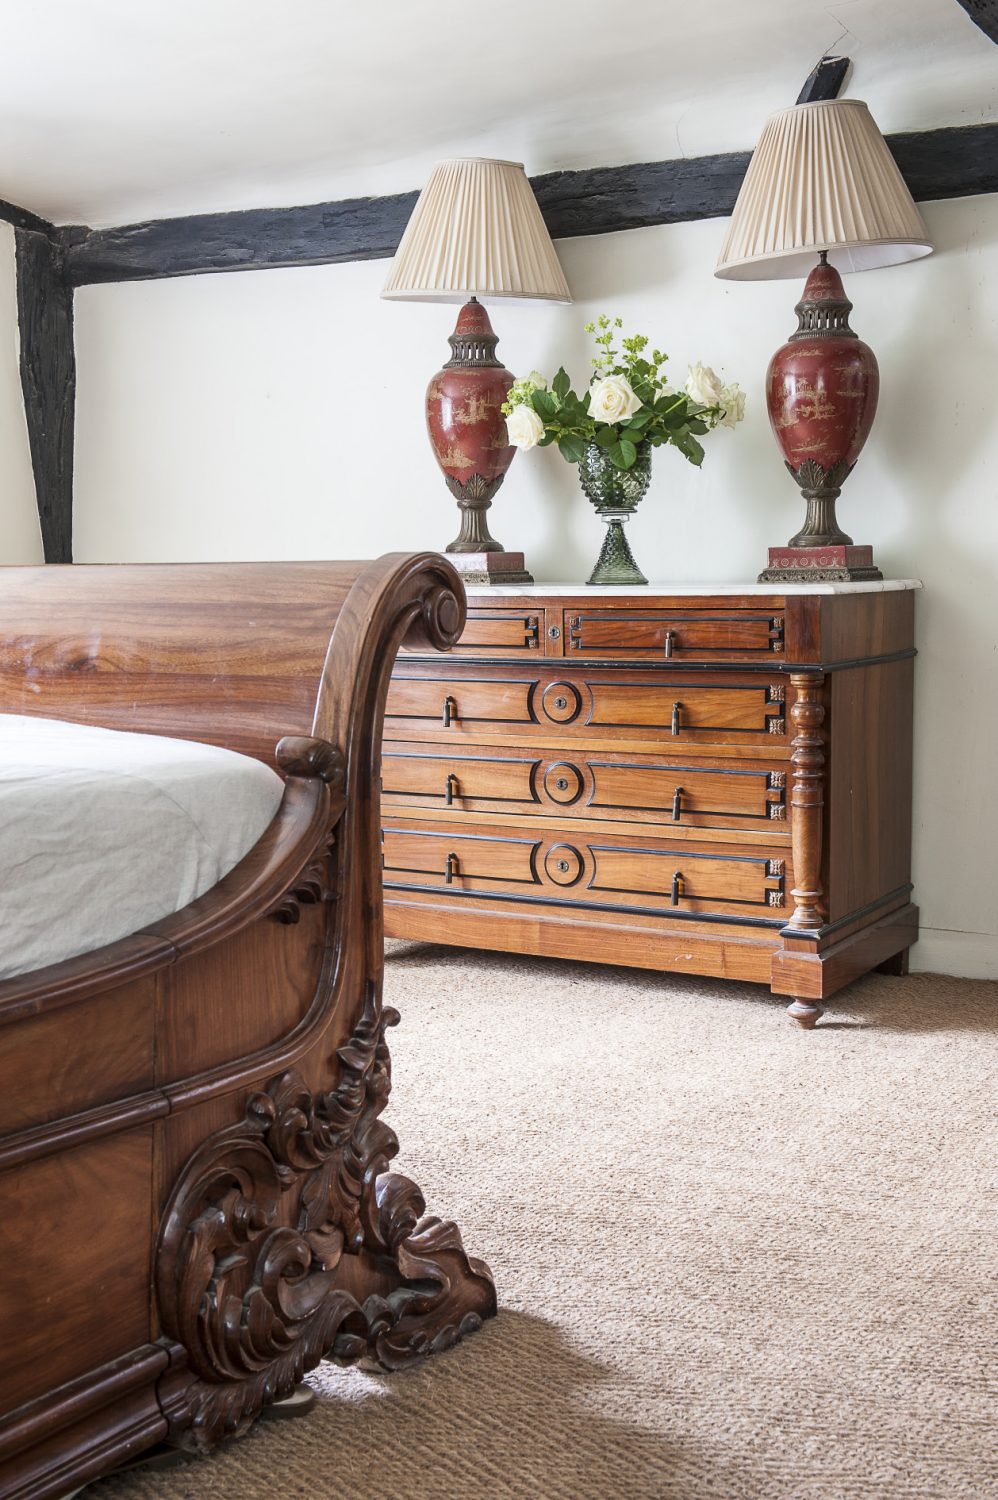 A superb marble-topped yew chest of drawers is home to a pair of Chinese table lamps from Hoopers in Tunbridge Wells